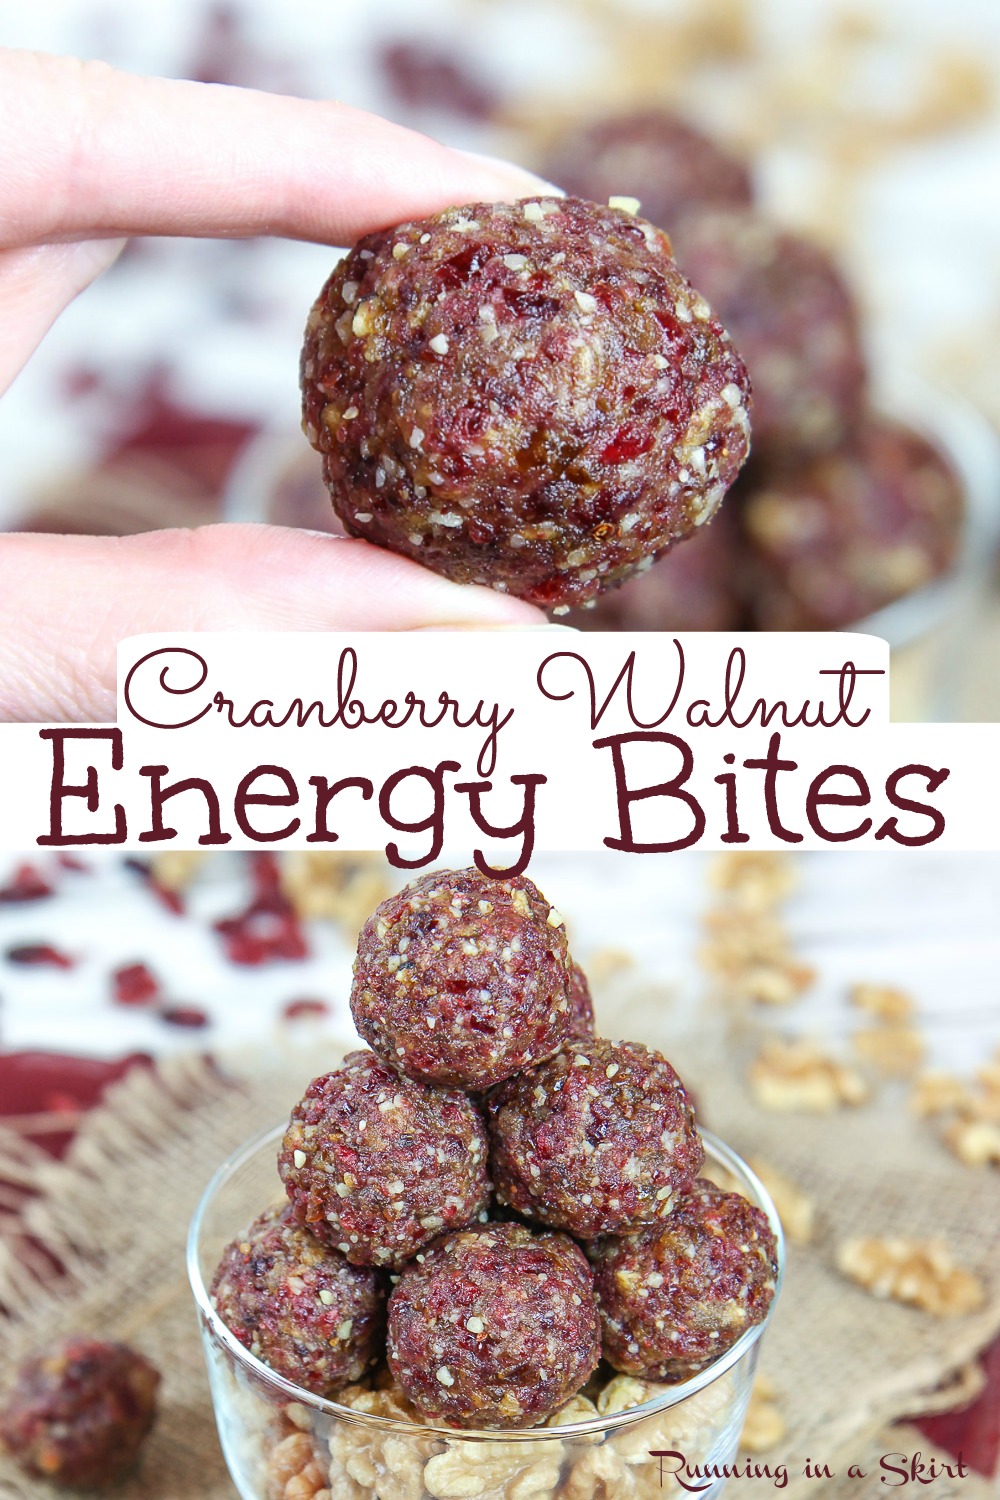 Cranberry Energy Bites with Walnuts - No Bake and only 4 ingredients! Healthy Energy Bites (low calorie) that are perfectly sweet with Medjool dates and vanilla (no sugar added.) A Holiday Energy Ball that's homemade and easy! Vegan, Vegetarian, Gluten Free / Running in a Skirt #vegan #vegetarian #healthy #healthyliving #energybite #energyball via @juliewunder